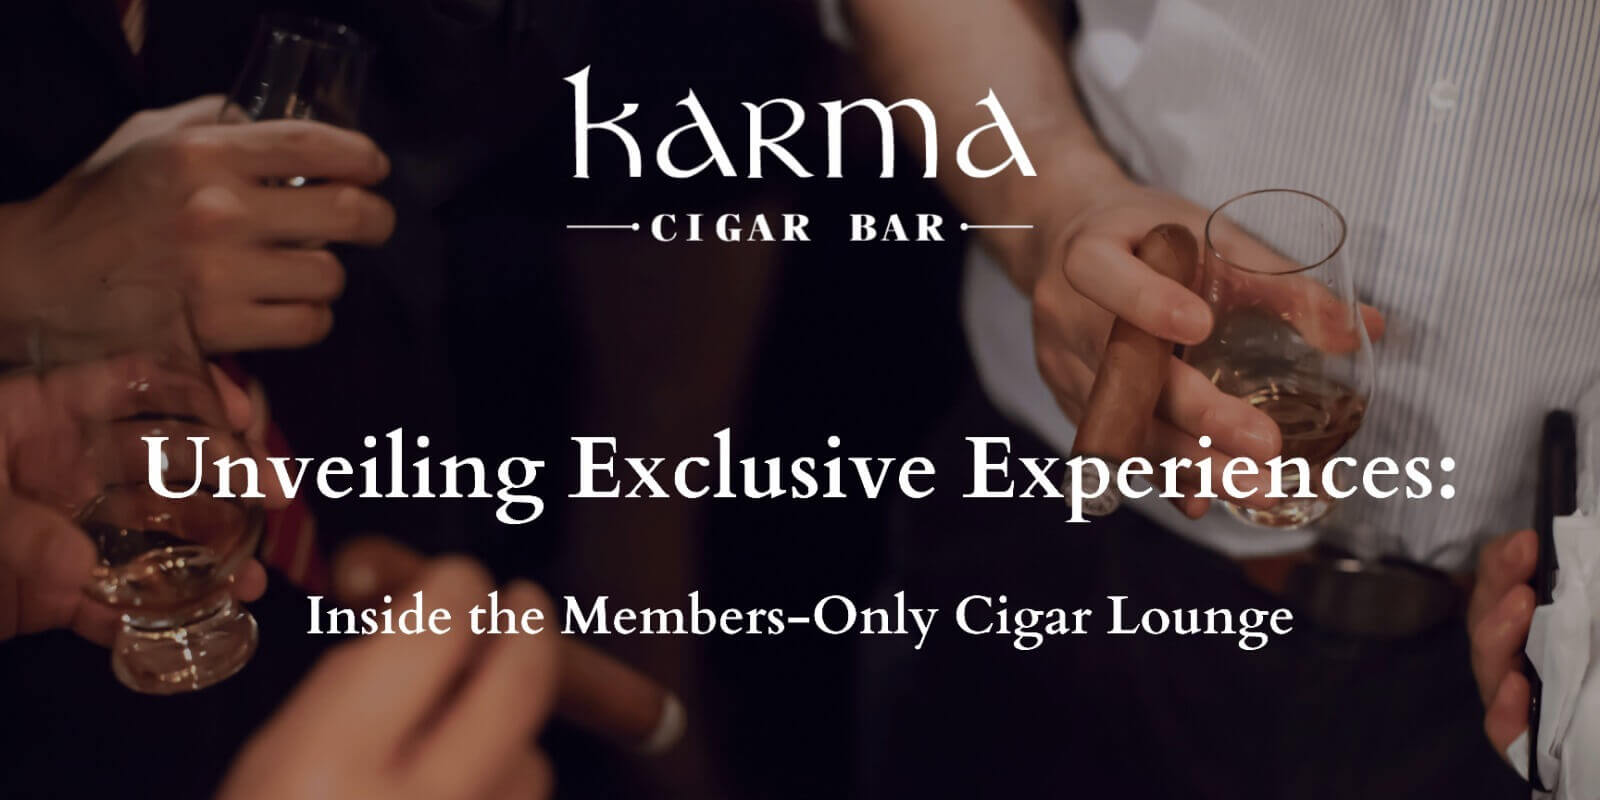 Inside the Members-Only Cigar Lounge